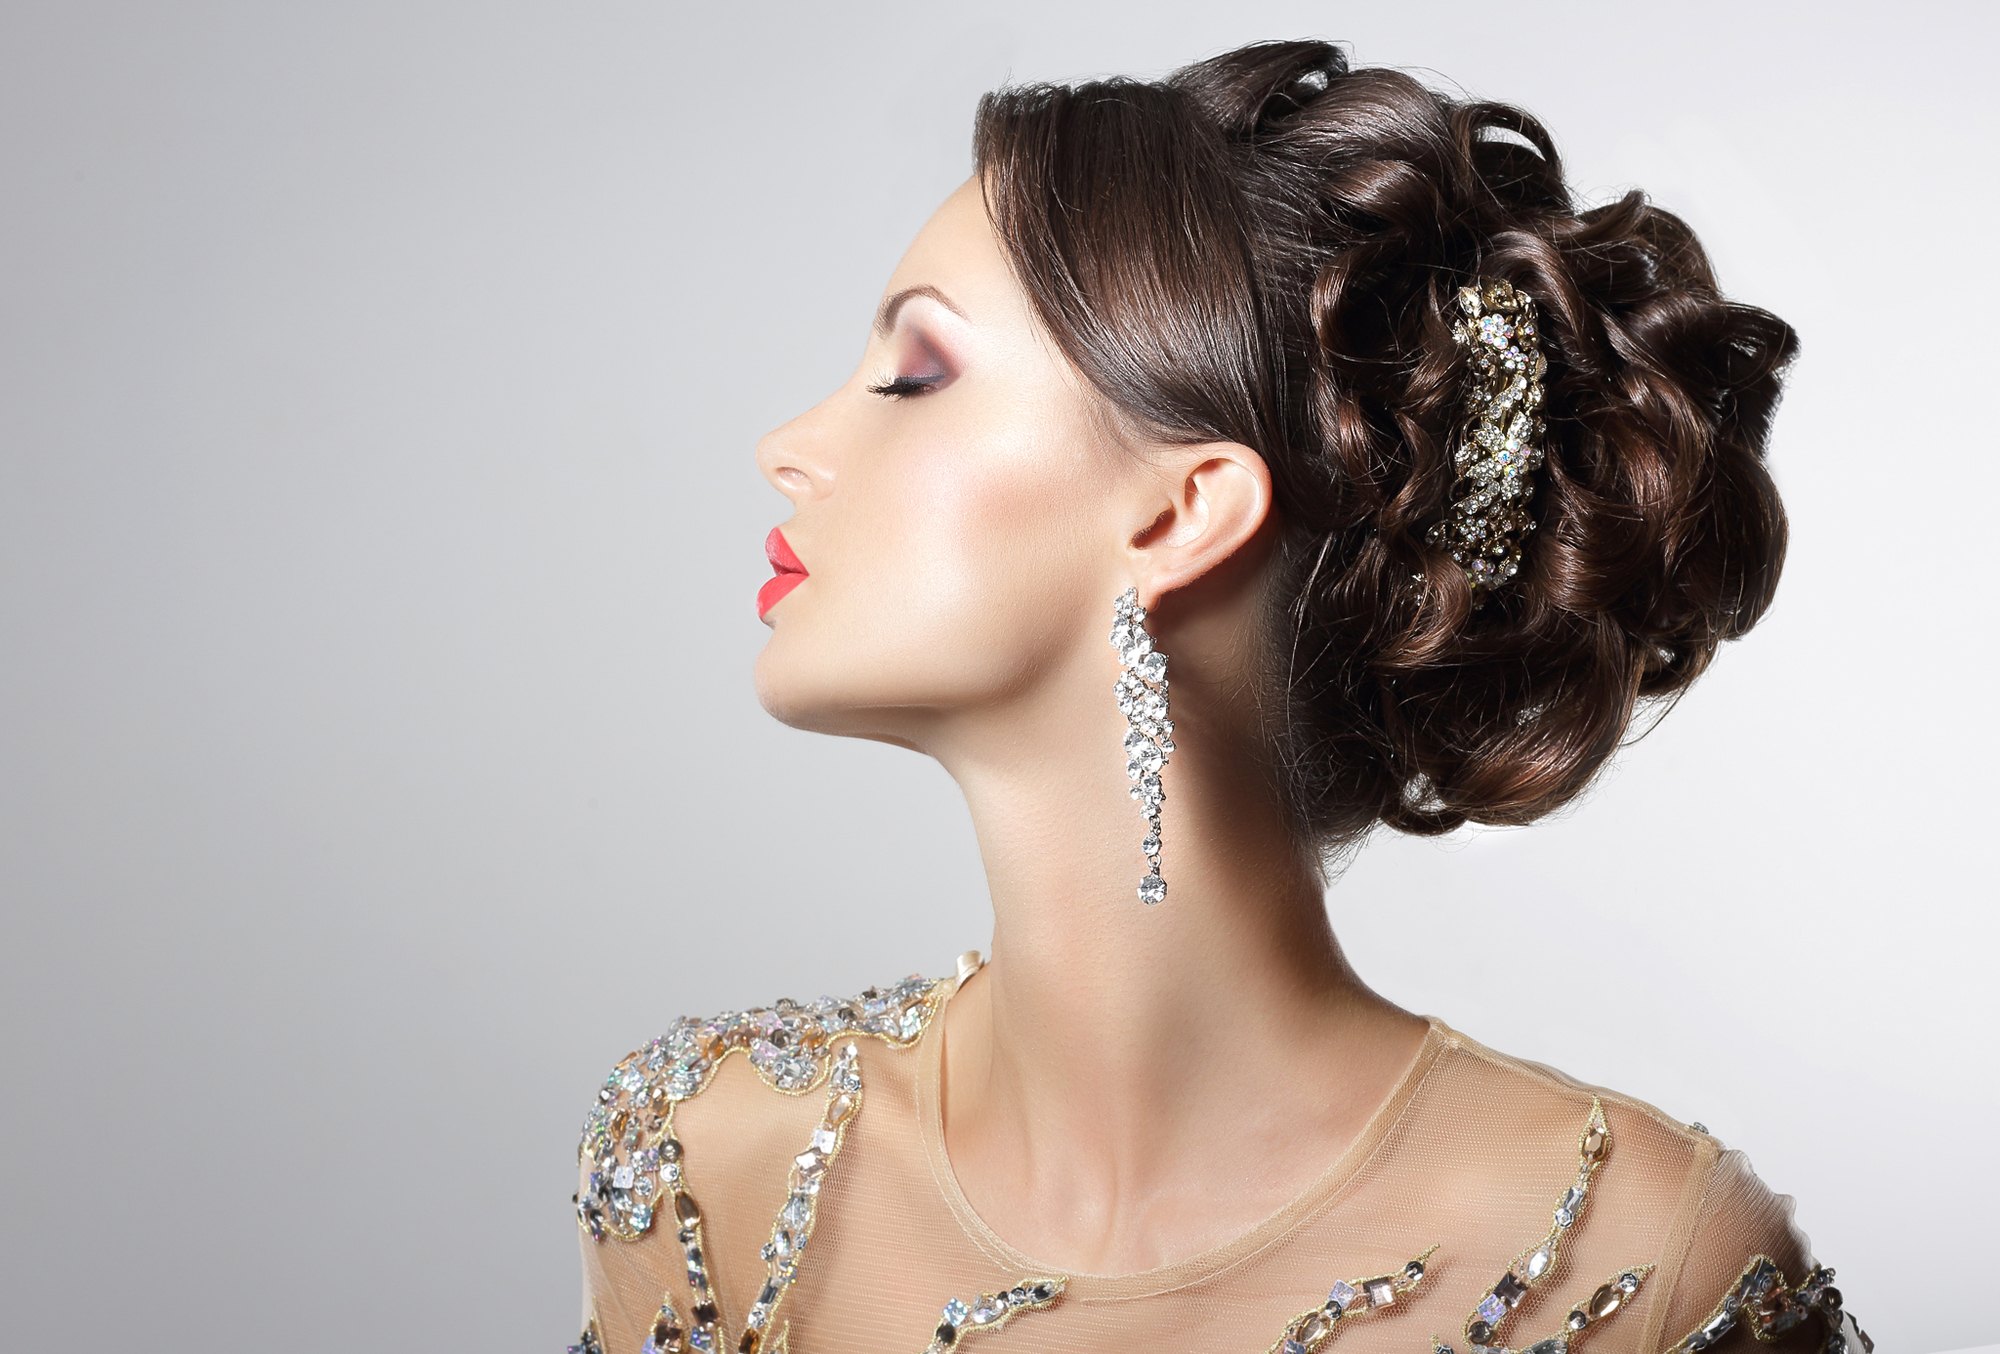 Woman wearing a NYE hairstyle with rhinestone hair accessories